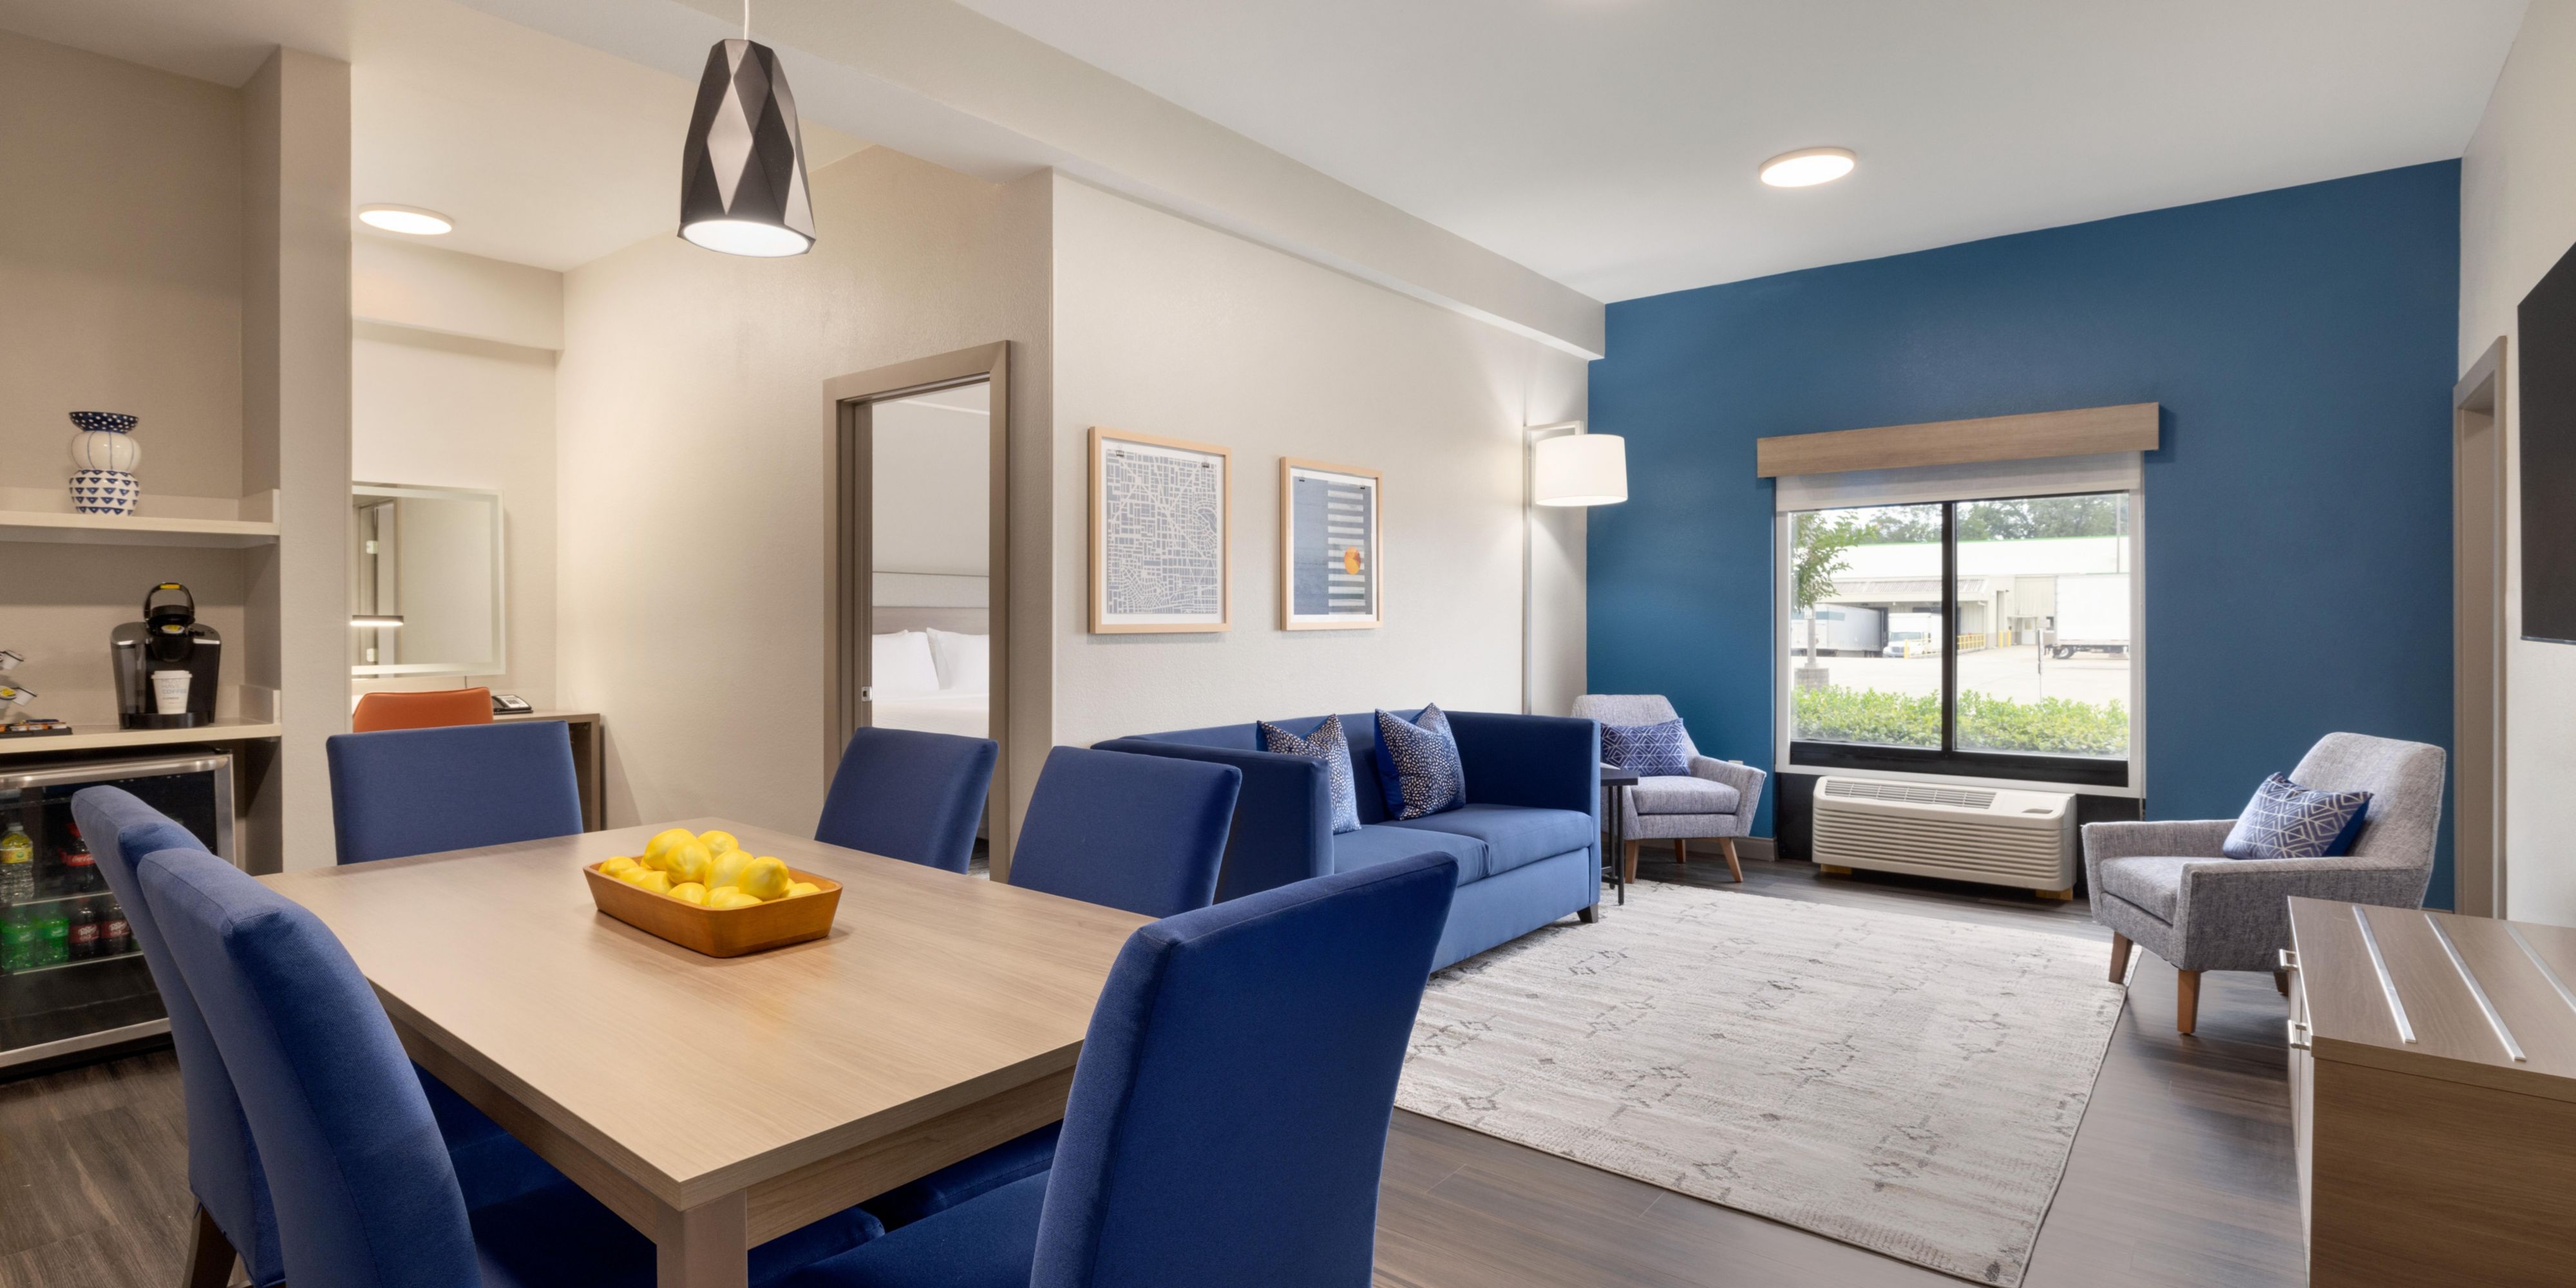 This spacious suite provides the peak in comfort and expanded living space. Whether booking a getaway with the family or a small group, you'll enjoy a host of extra amenities, including a modern kitchenette and separate room and living areas. 